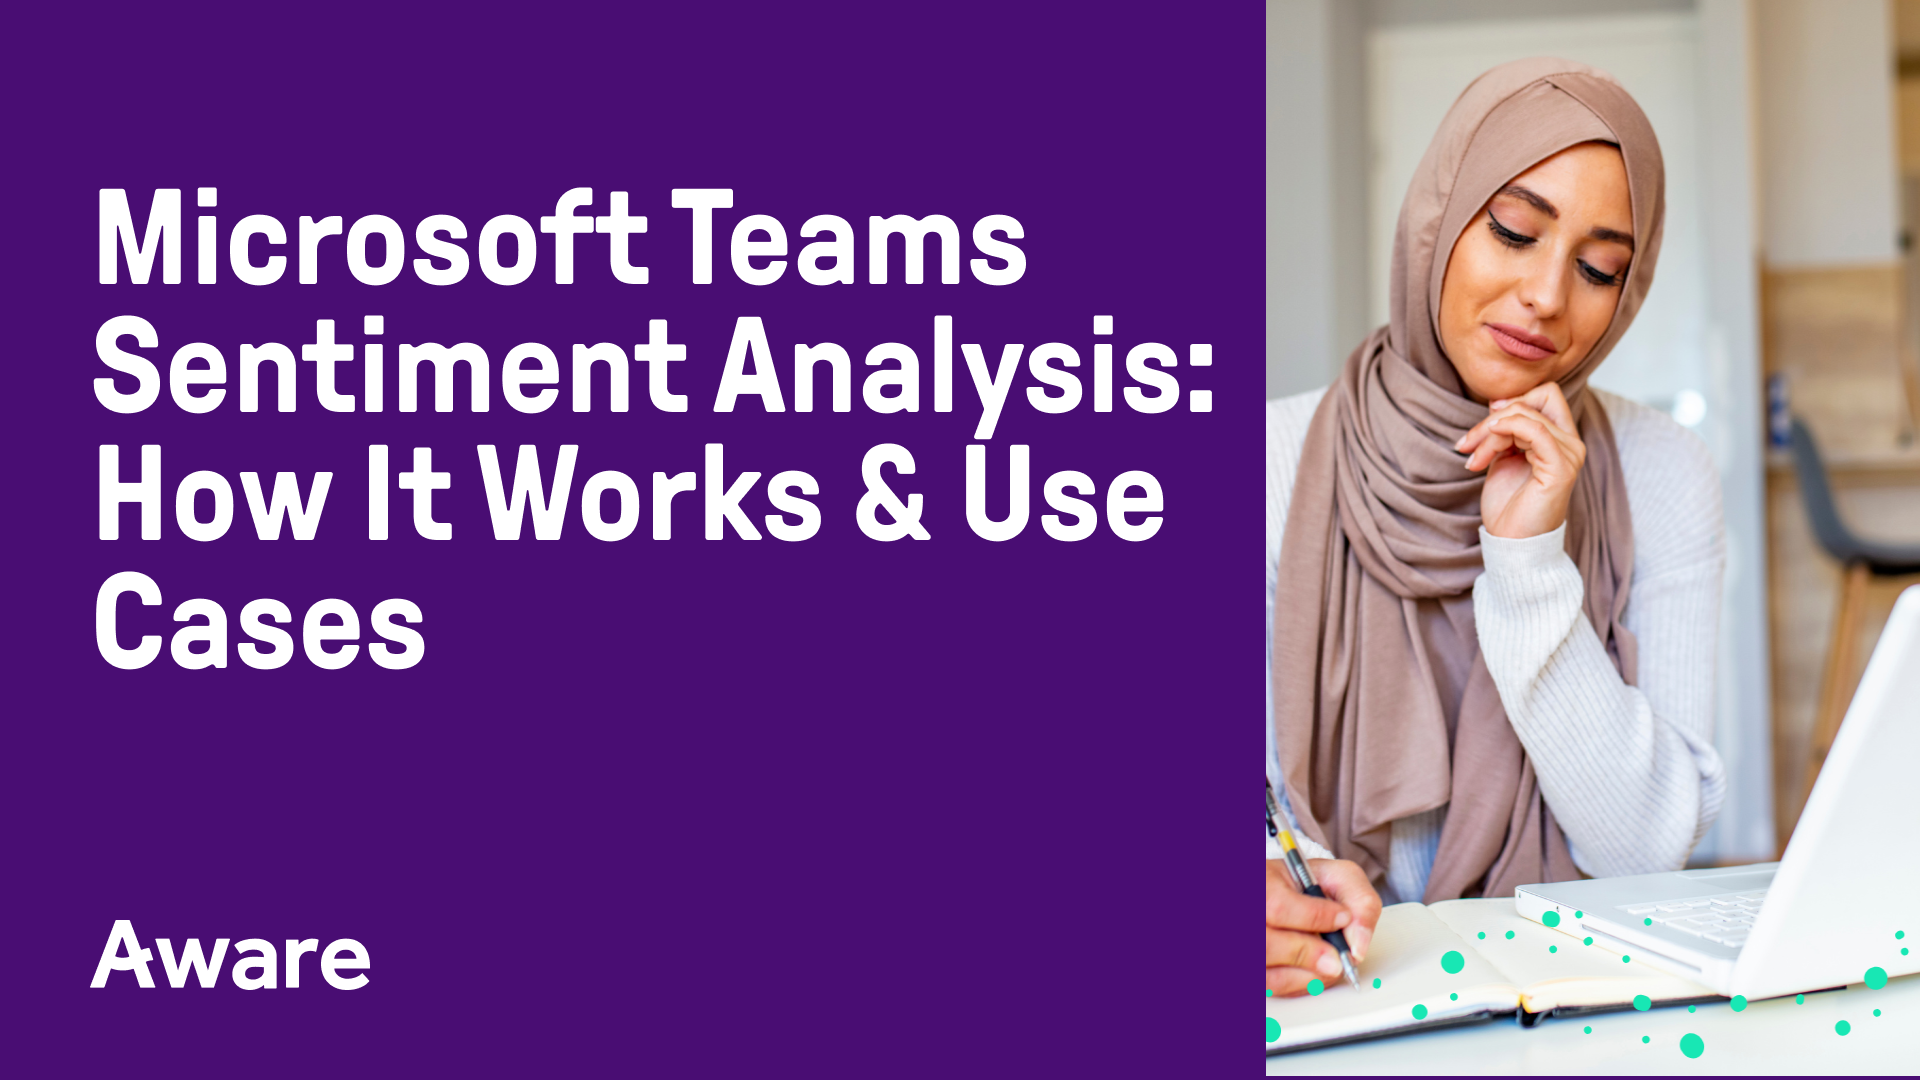 Microsoft Teams Sentiment Analysis: How It Works & Use Cases